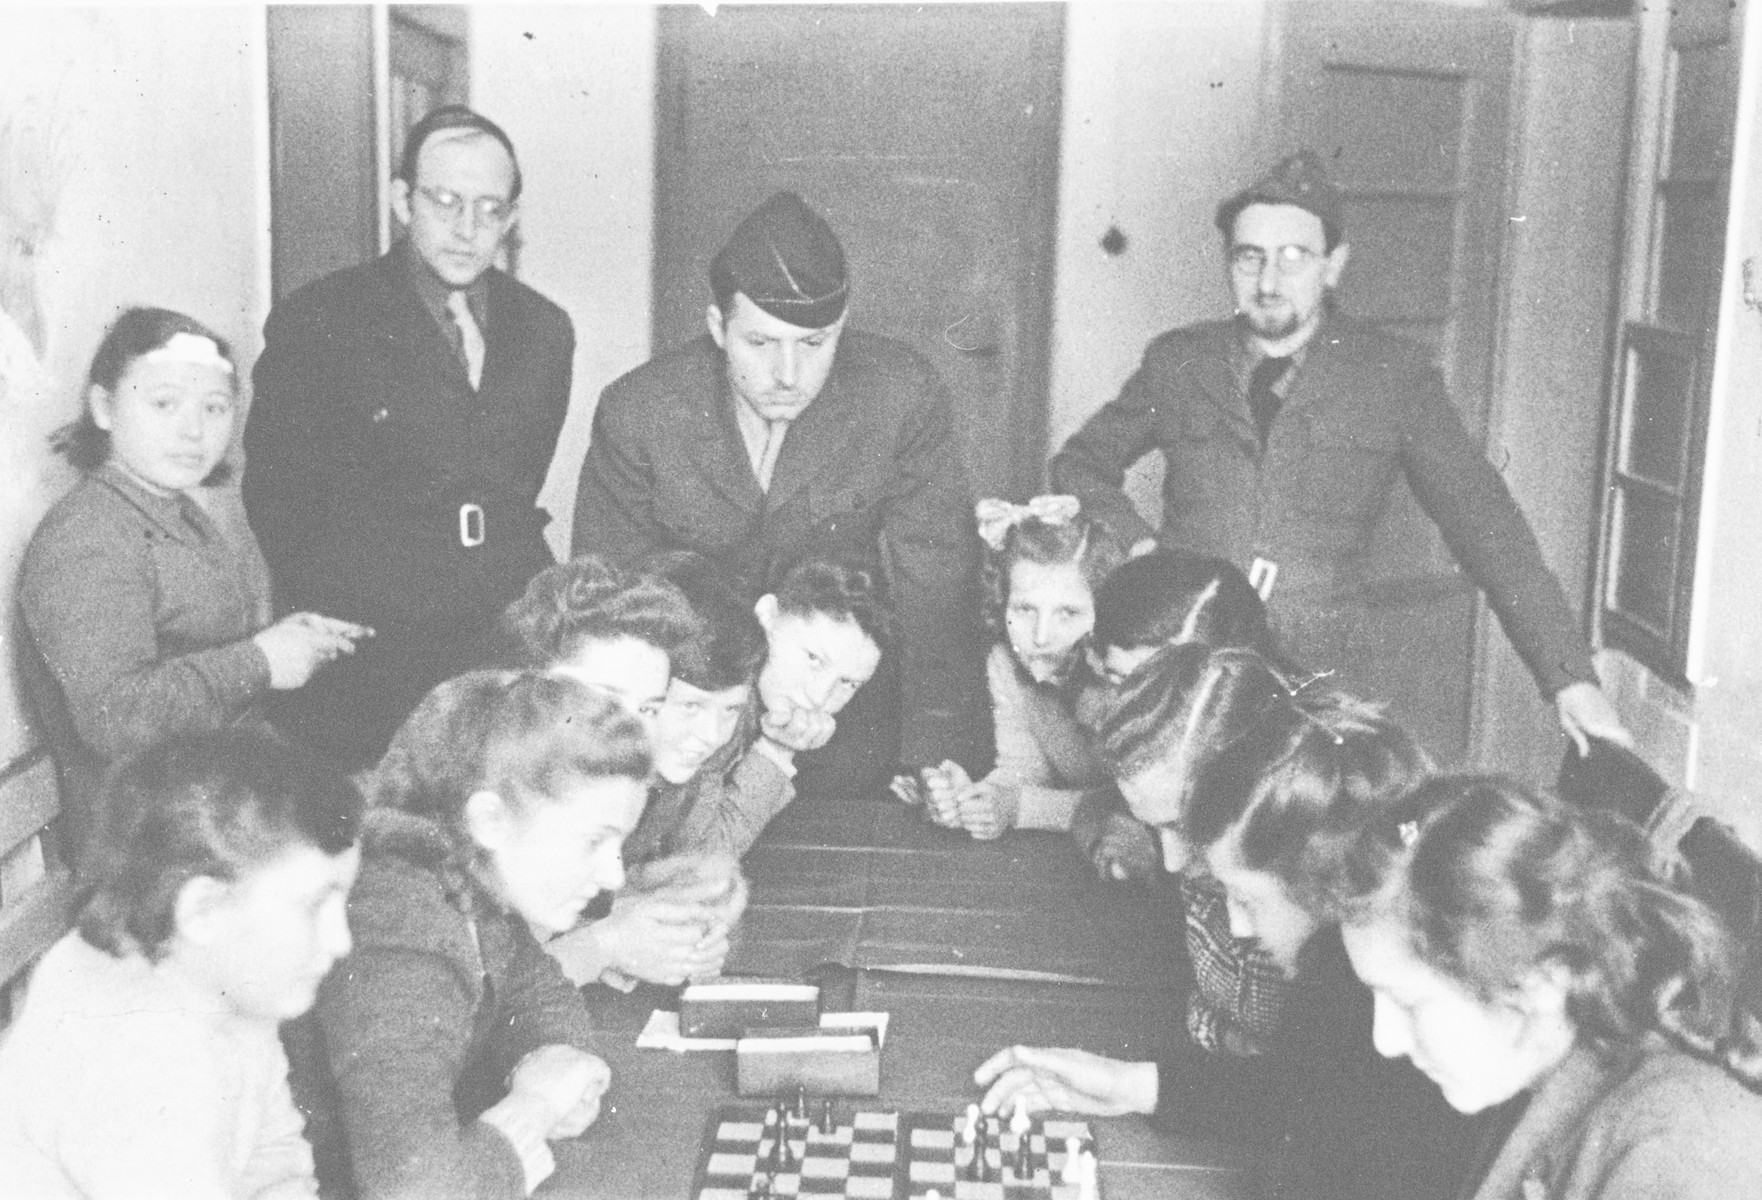 School girls play chess in the Poalei Agudat Yisrael children's home in Ulm run by the Vaad Hatzala while Vaad rabbis look on.

Rabbi Nathan Baruch is in the center and Rabbi Aviezer Burstin is standing on the right.